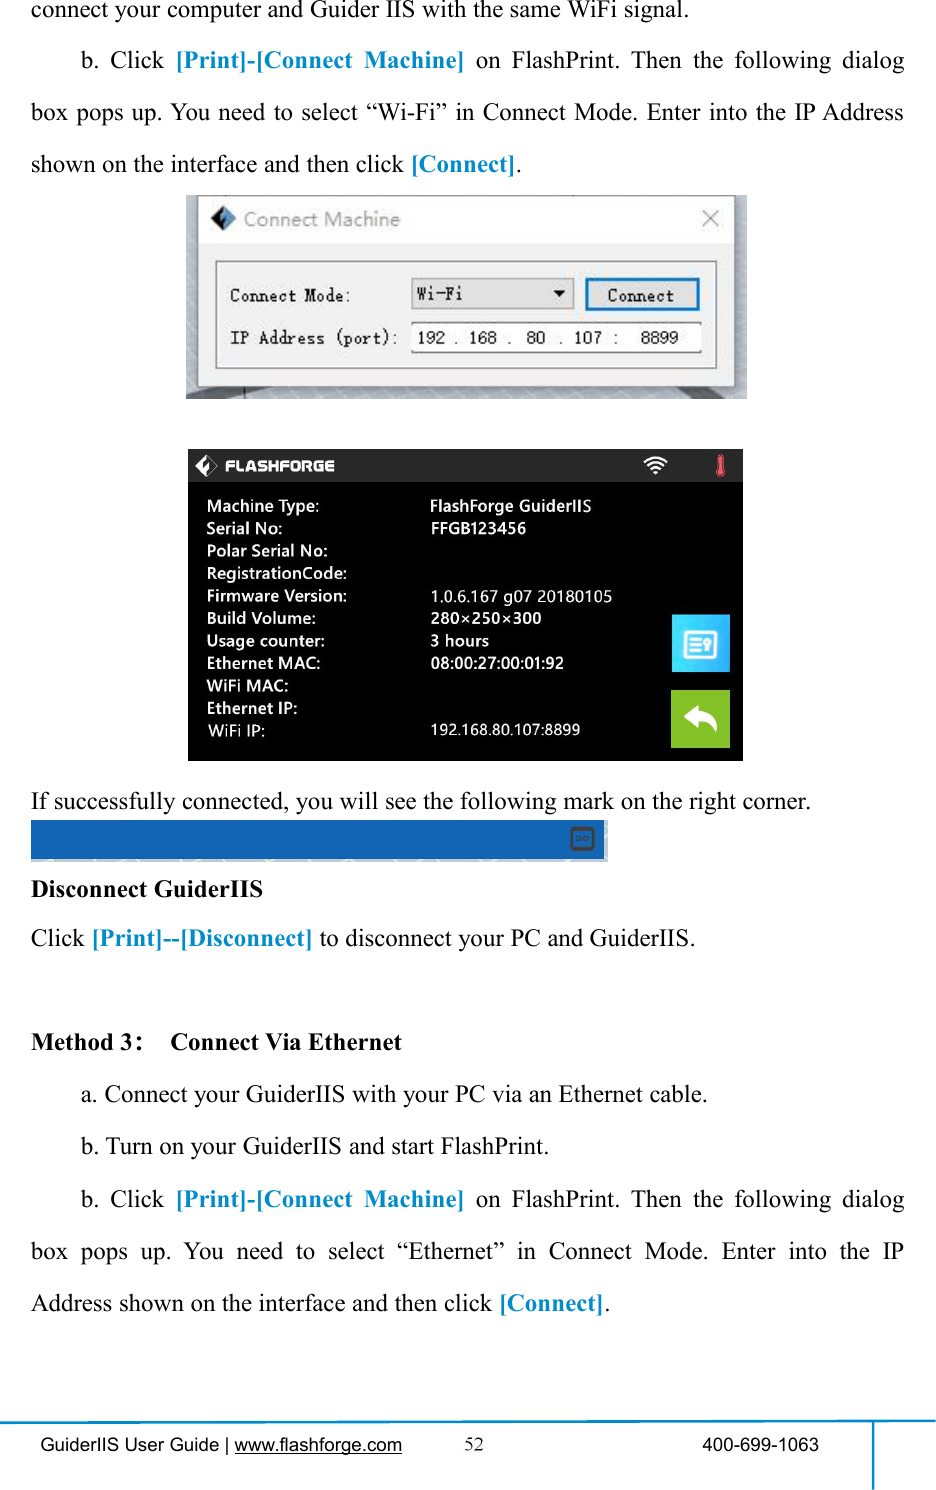 GuiderIIS User Guide | www.flashforge.com 400-699-1063connect your computer and Guider IIS with the same WiFi signal.b. Click [Print]-[Connect Machine] on FlashPrint. Then the following dialogbox pops up. You need to select “Wi-Fi” in Connect Mode. Enter into the IP Addressshown on the interface and then click [Connect].If successfully connected, you will see the following mark on the right corner.Disconnect GuiderIISClick [Print]--[Disconnect] to disconnect your PC and GuiderIIS.Method 3：Connect Via Etherneta. Connect your GuiderIIS with your PC via an Ethernet cable.b. Turn on your GuiderIIS and start FlashPrint.b. Click [Print]-[Connect Machine] on FlashPrint. Then the following dialogbox pops up. You need to select “Ethernet” in Connect Mode. Enter into the IPAddress shown on the interface and then click [Connect].